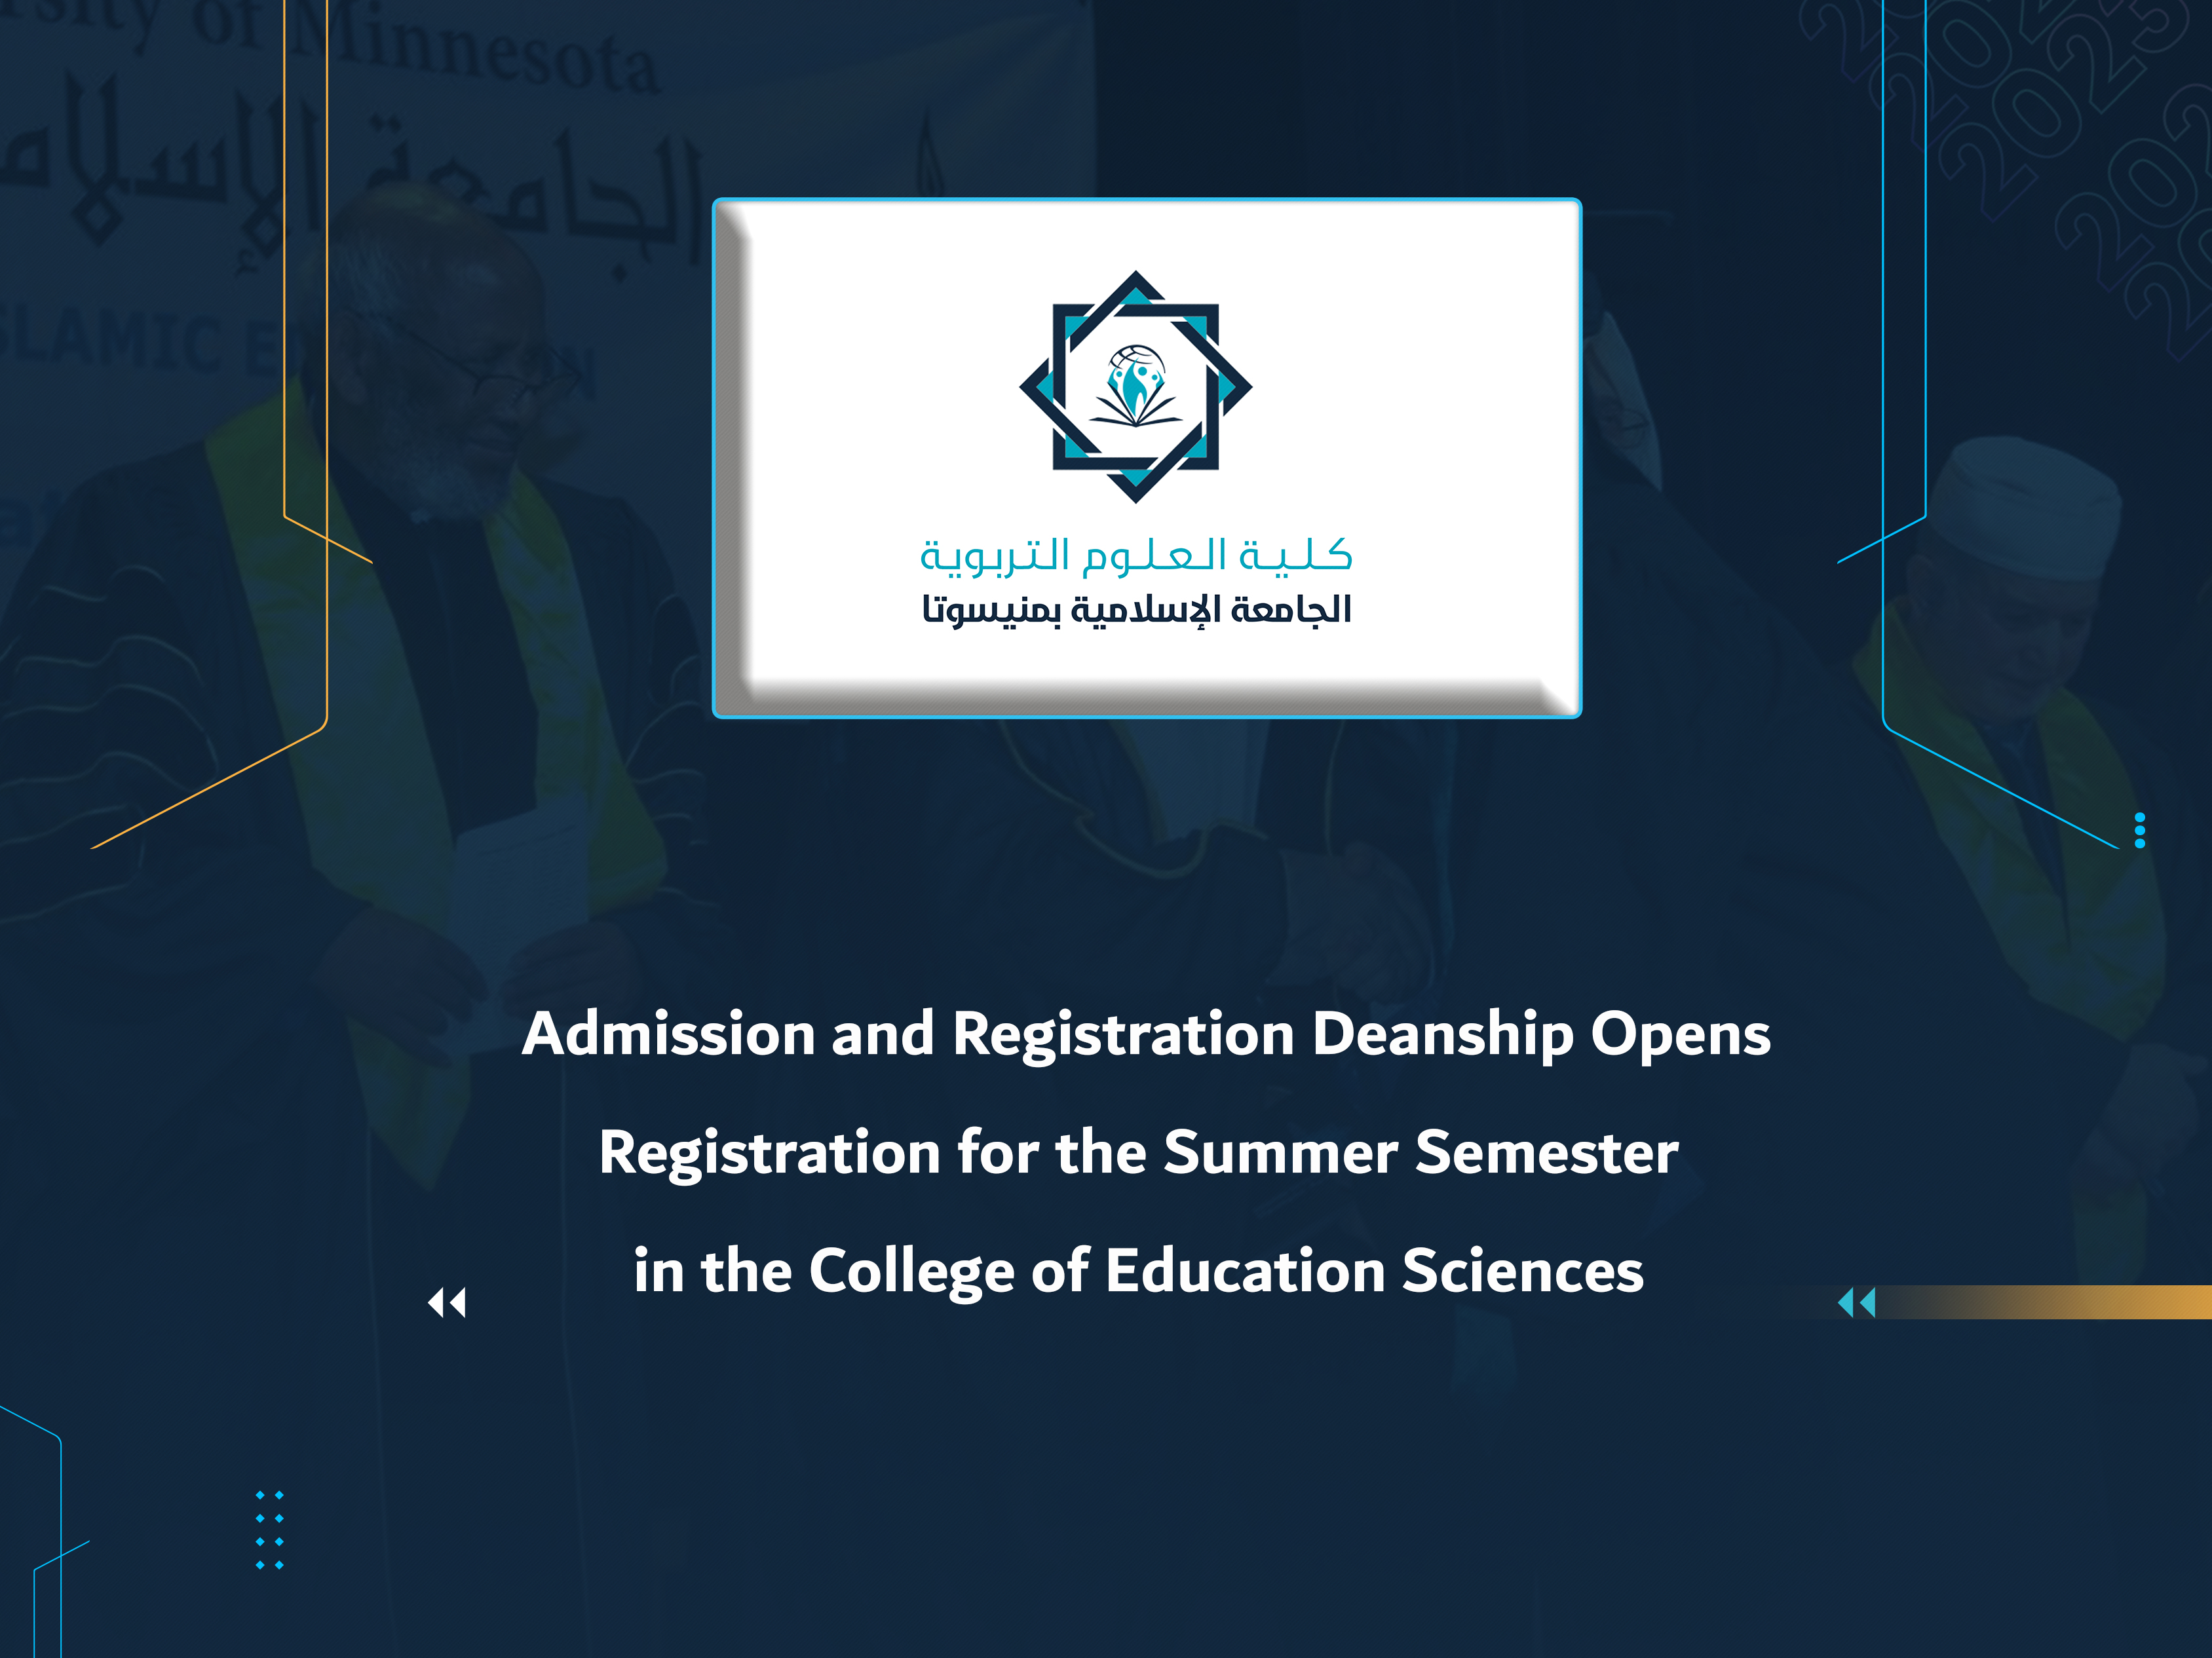 Admission and Registration Deanship Opens Registration for the Summer Semester in the College of Education Sciences